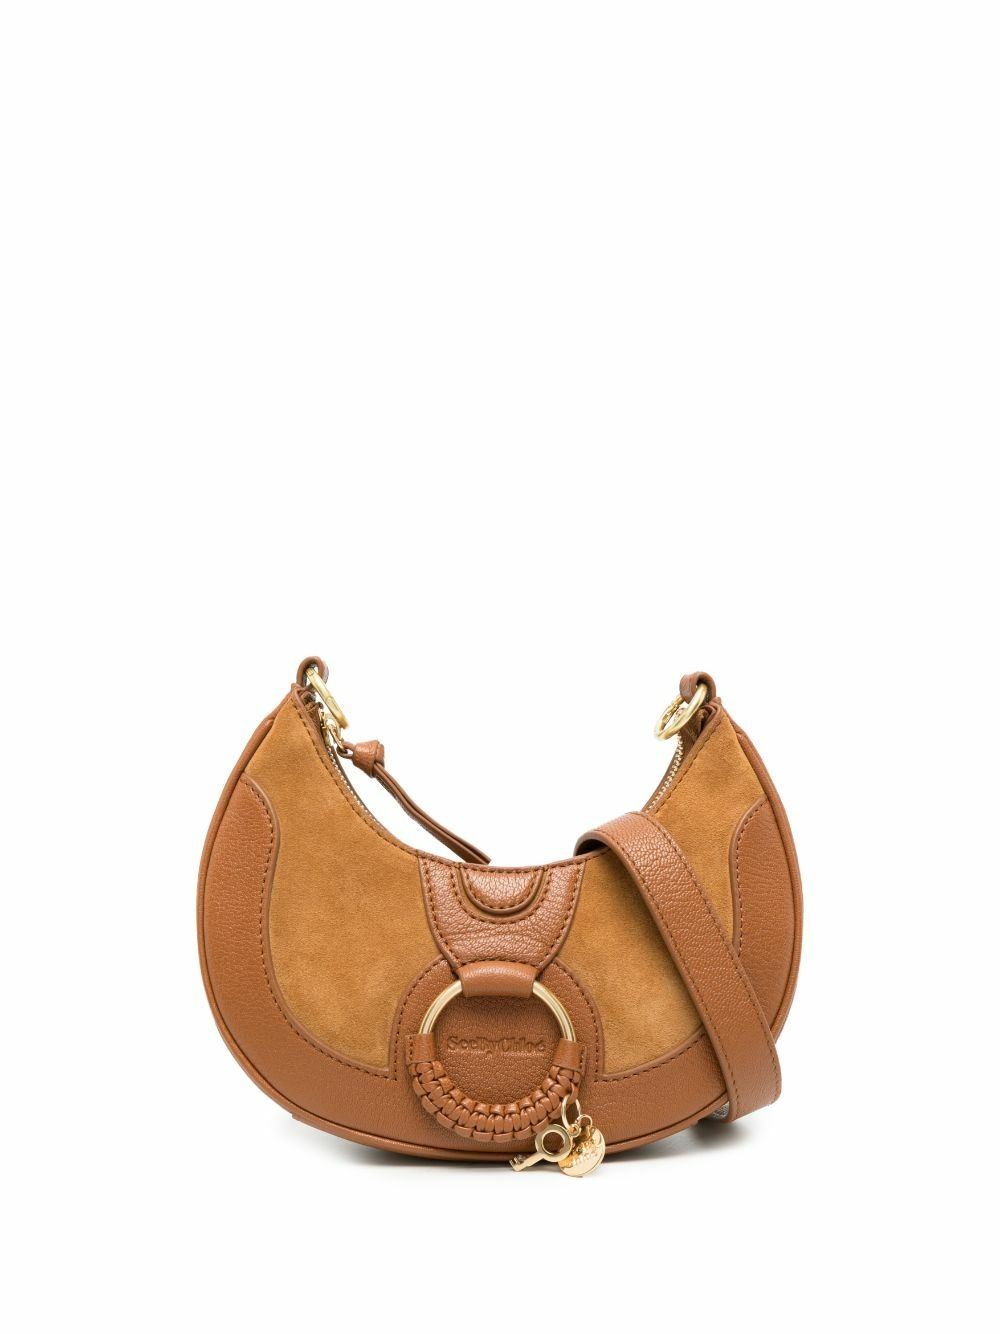 SEE BY CHLOÉ - Hana Leather Shoulder Bag See by Chloe